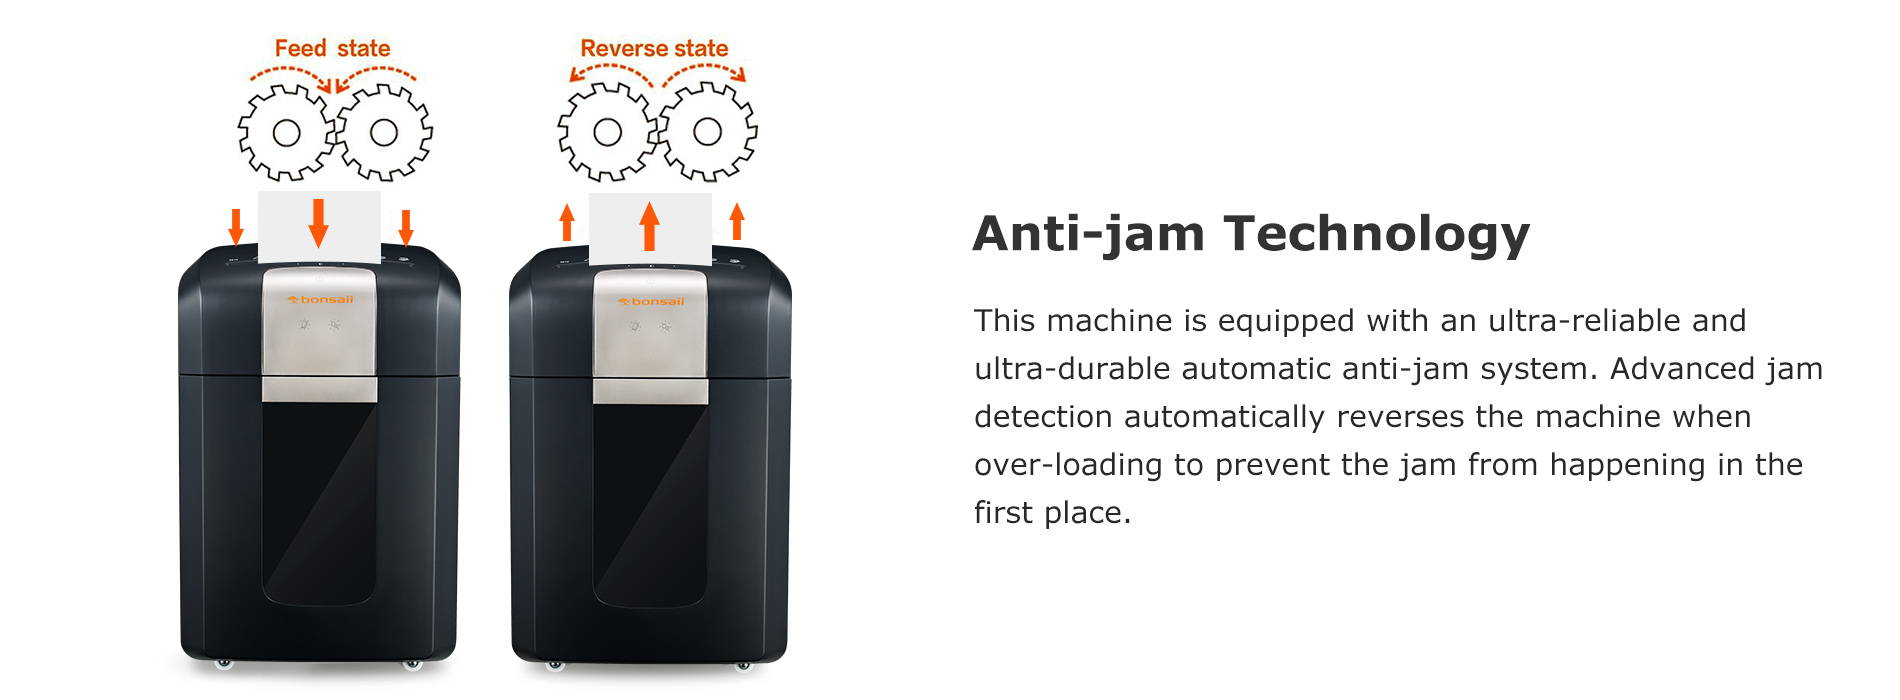 Anti-jam Technology This machine is equipped with an ultra-reliable and ultra-durable automatic anti-jam system. Advanced jam detection automatically reverses the machine when over-loading to prevent the jam from happening in the first place. 